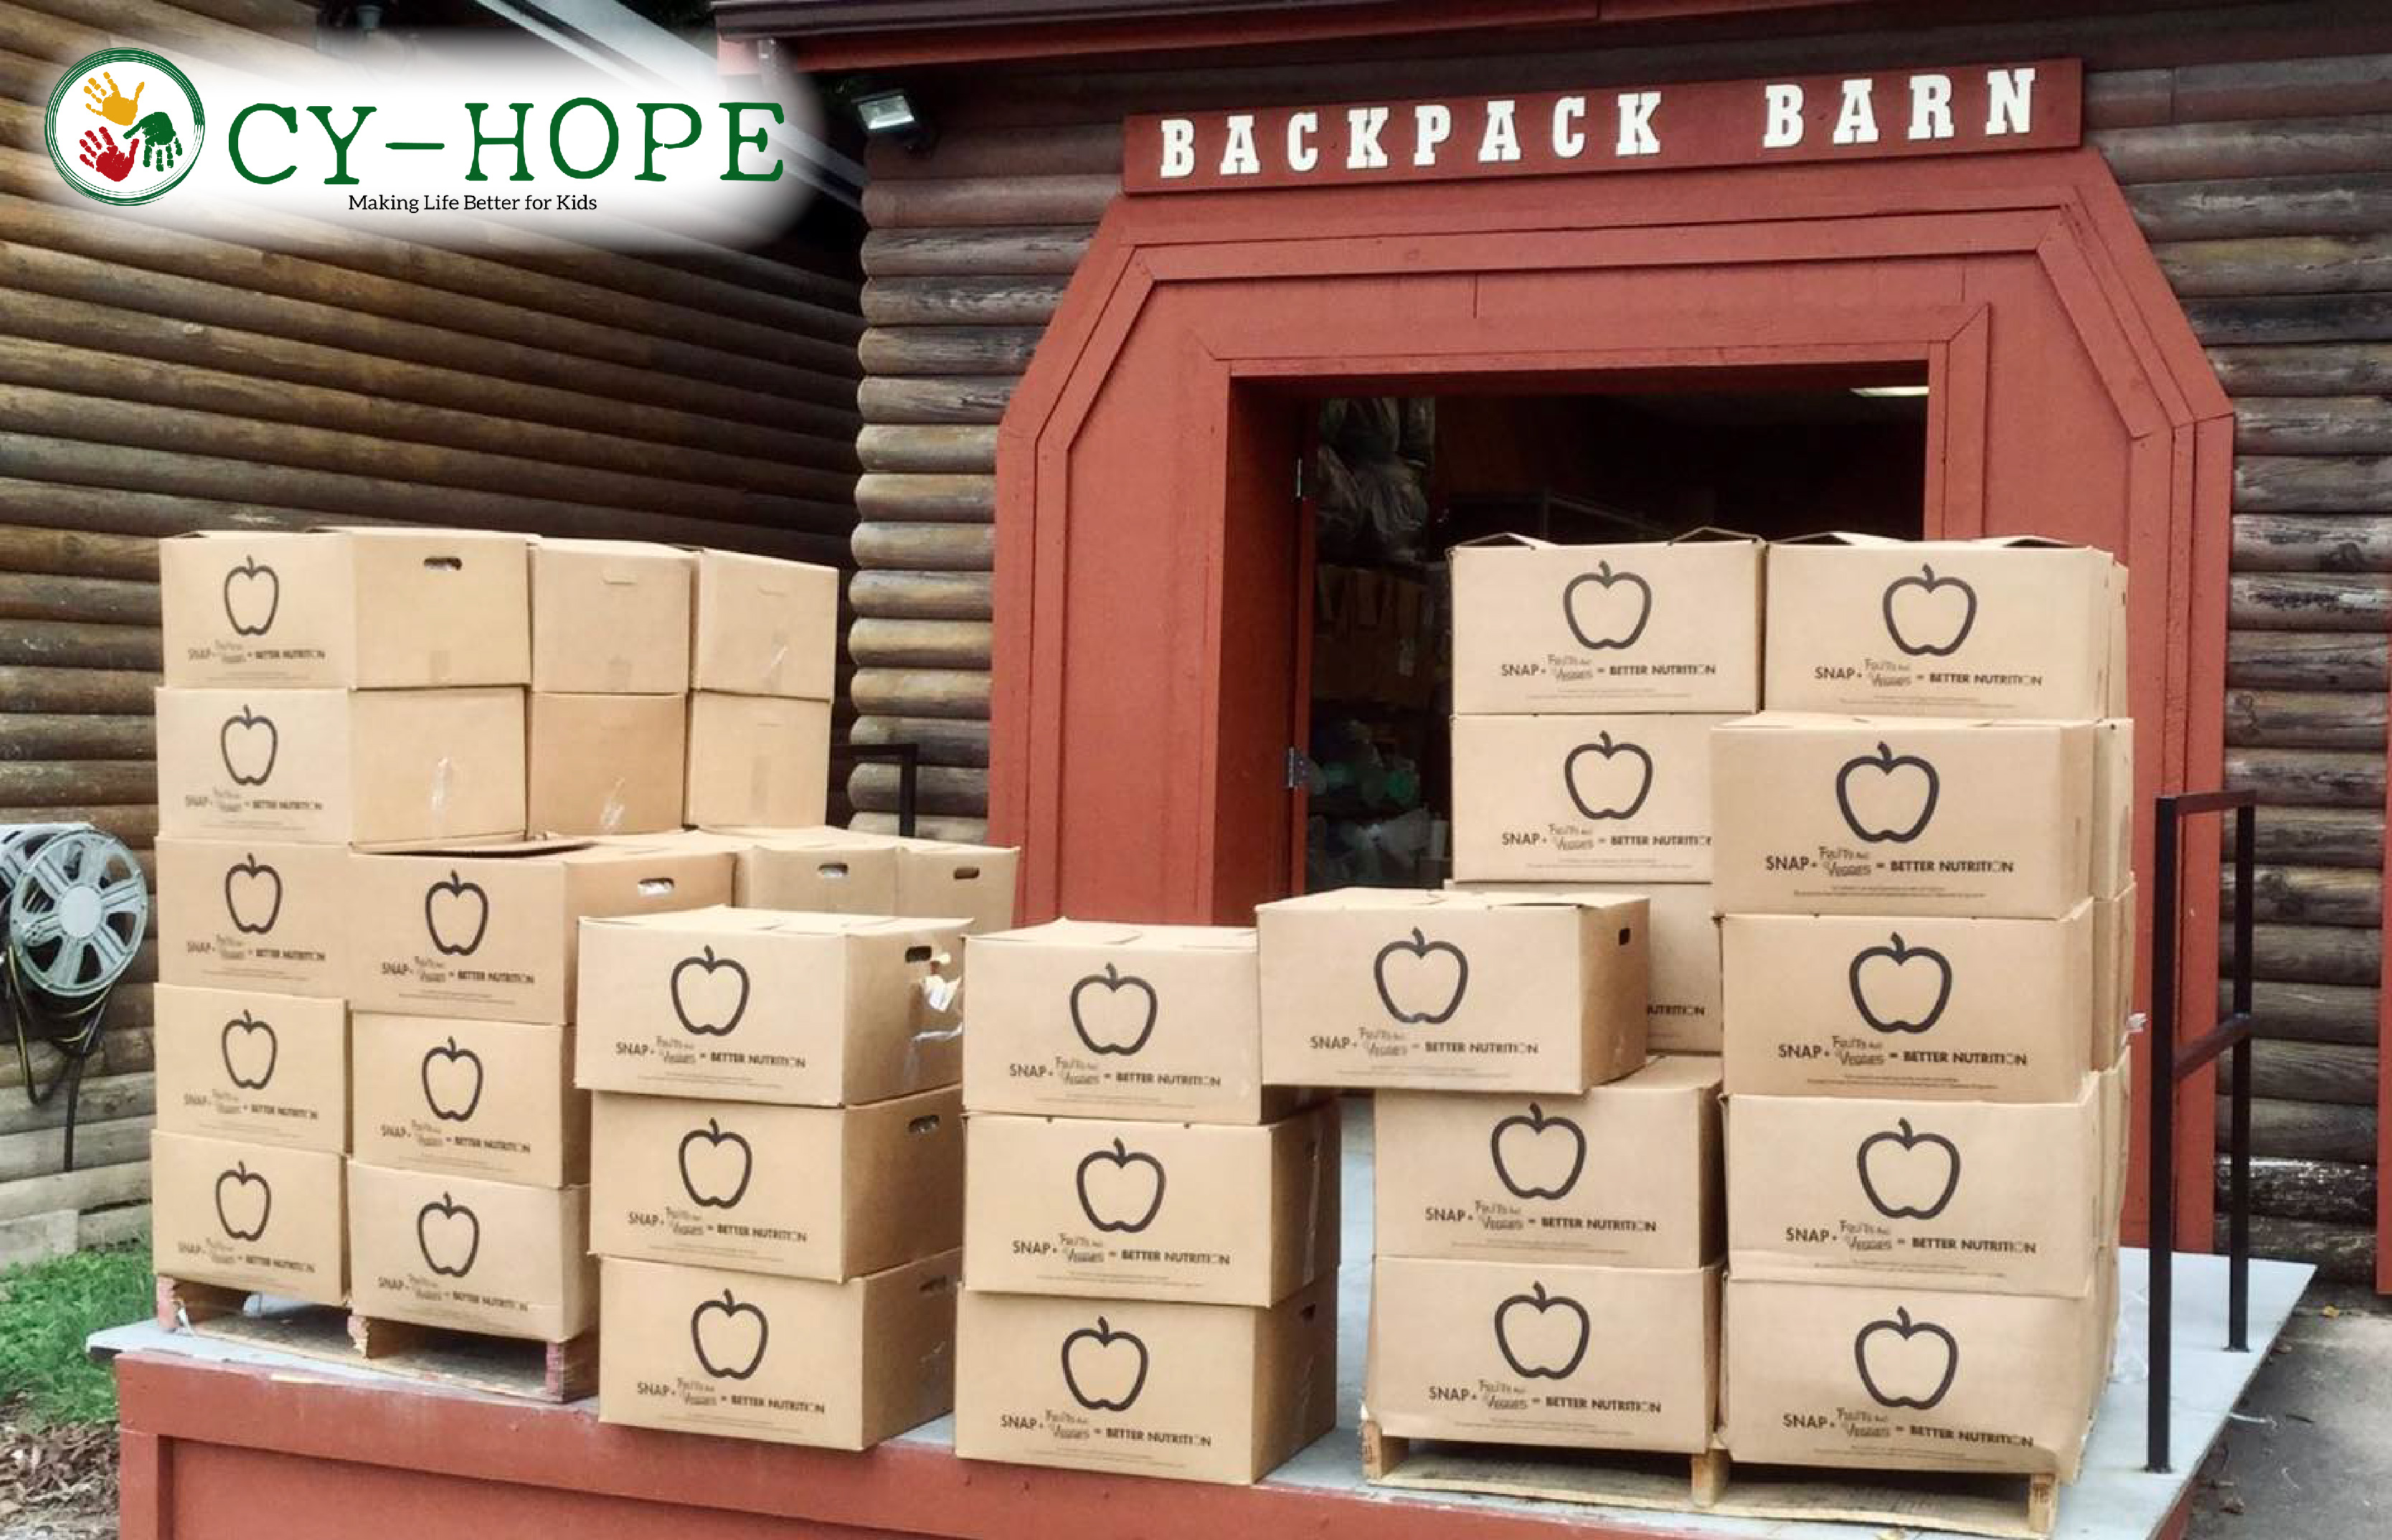 Cy-Hope Launches Summer Feeding Program to Support Underserved Children